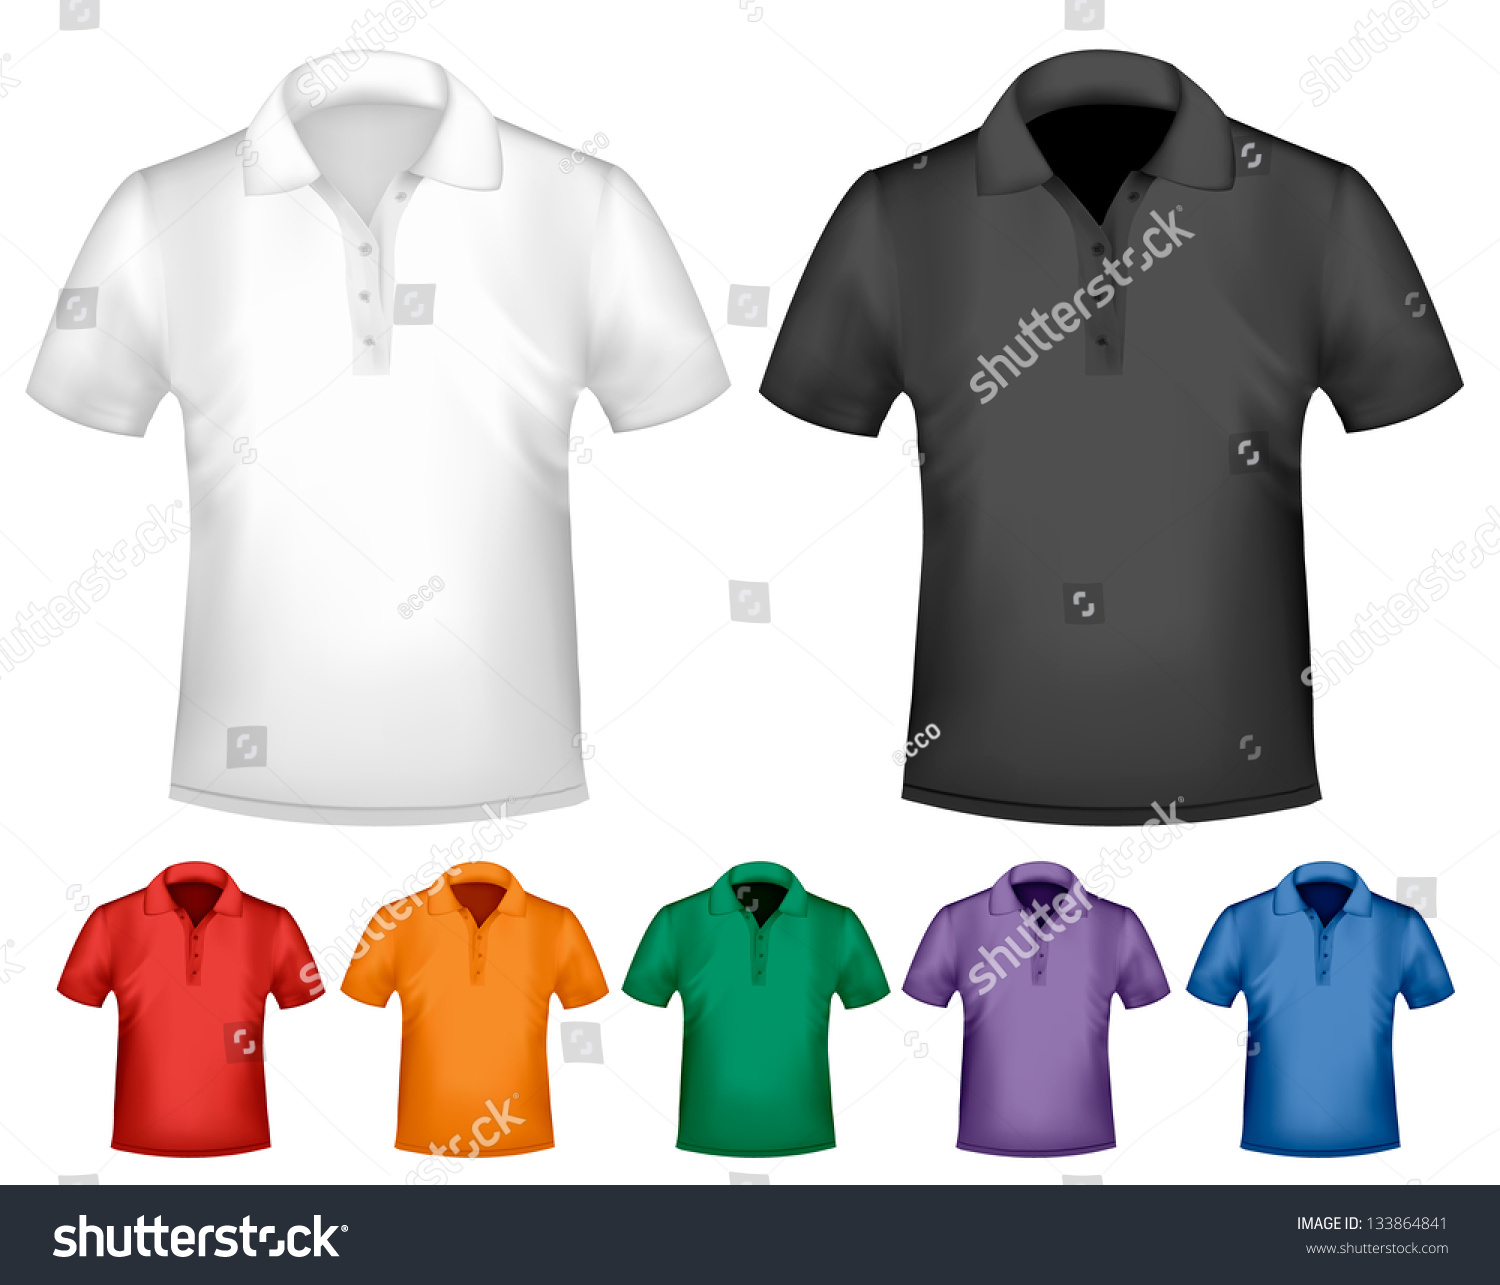 Black And White And Color Men Polo Shirts. Design Template. Raster Version Of Vector - 133864841 ...